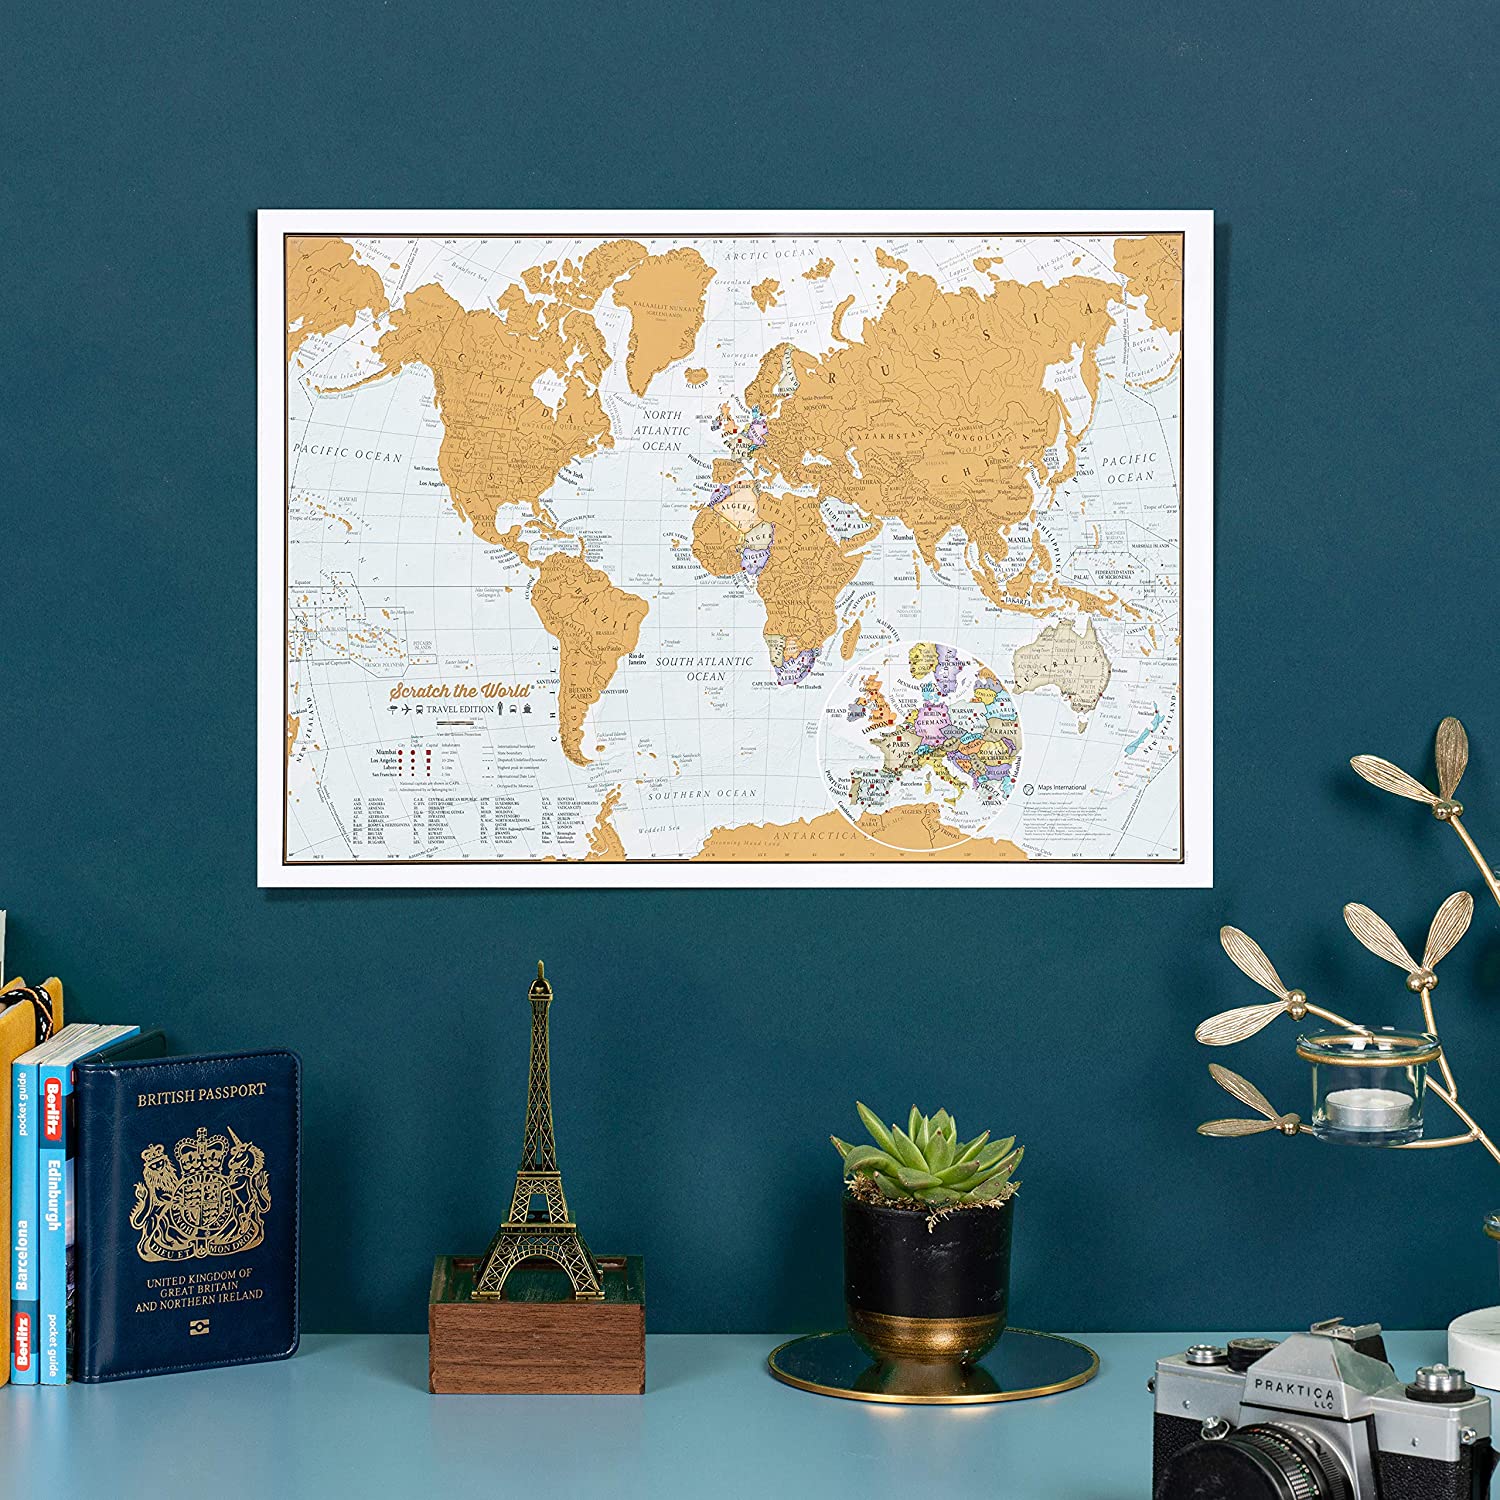 map Best 15 Valentine's Day Gift Ideas for Husband - 11